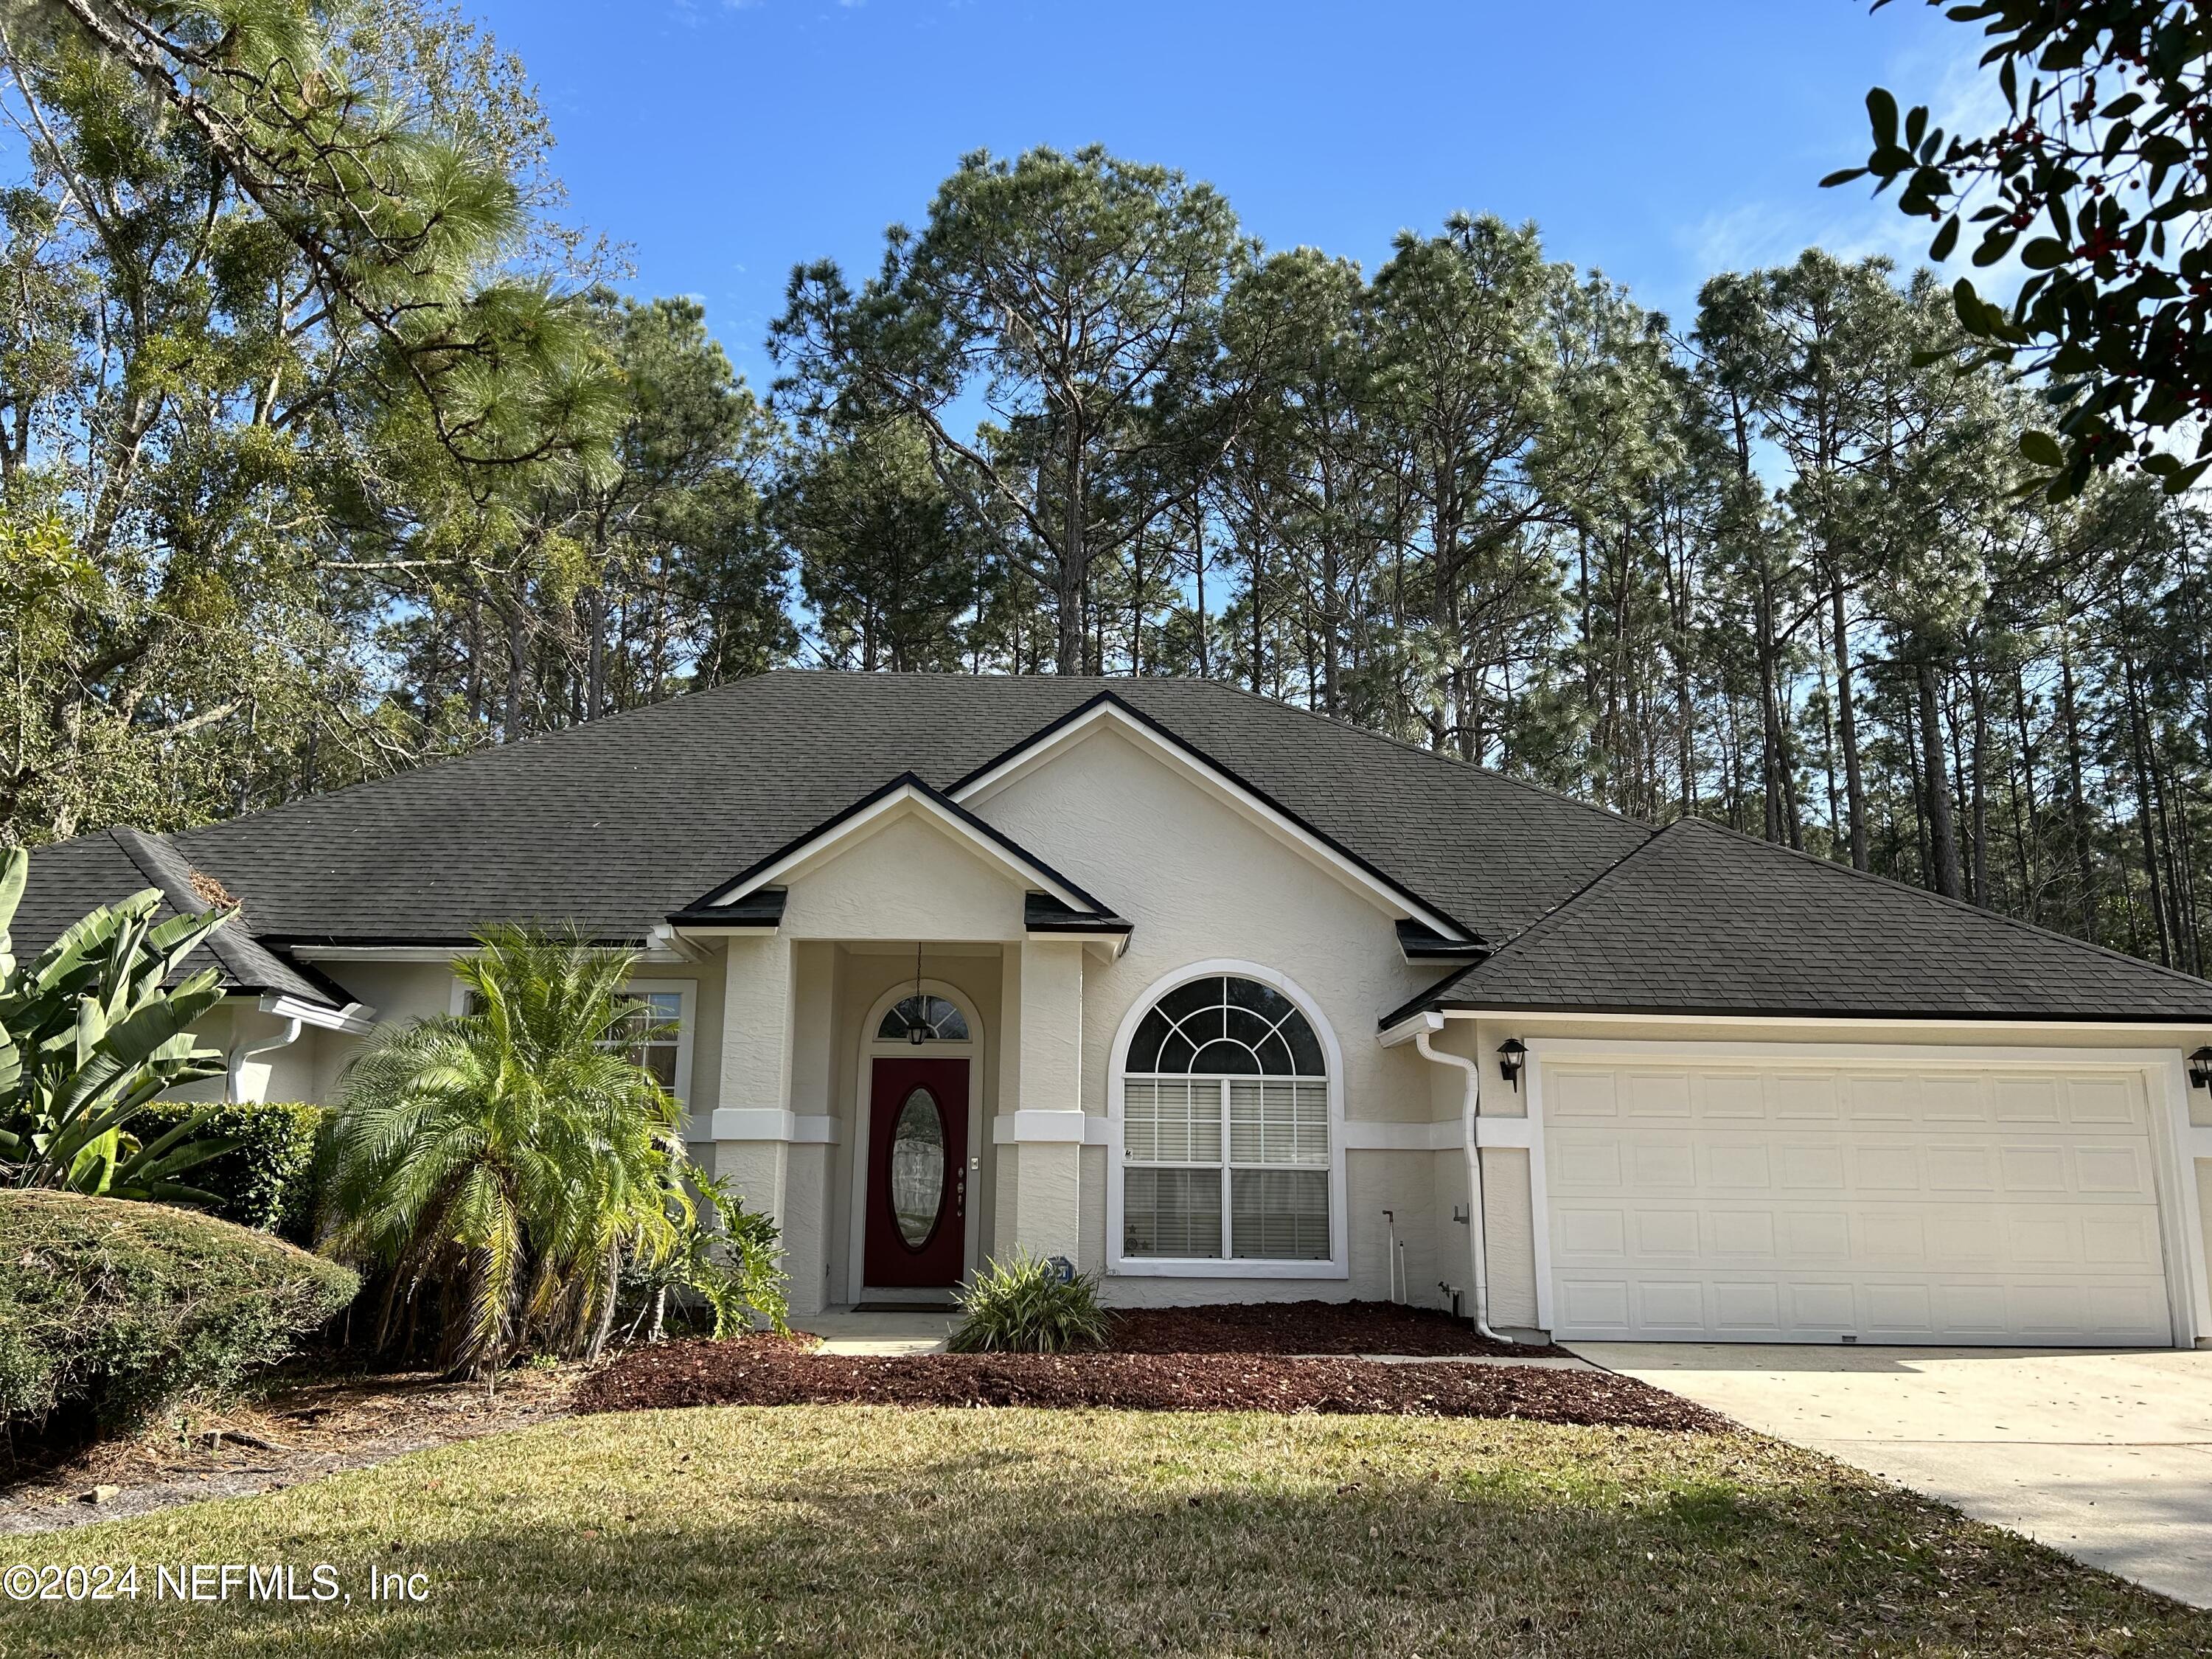 St Johns, FL home for sale located at 249 MAPLEWOOD Drive, St Johns, FL 32259